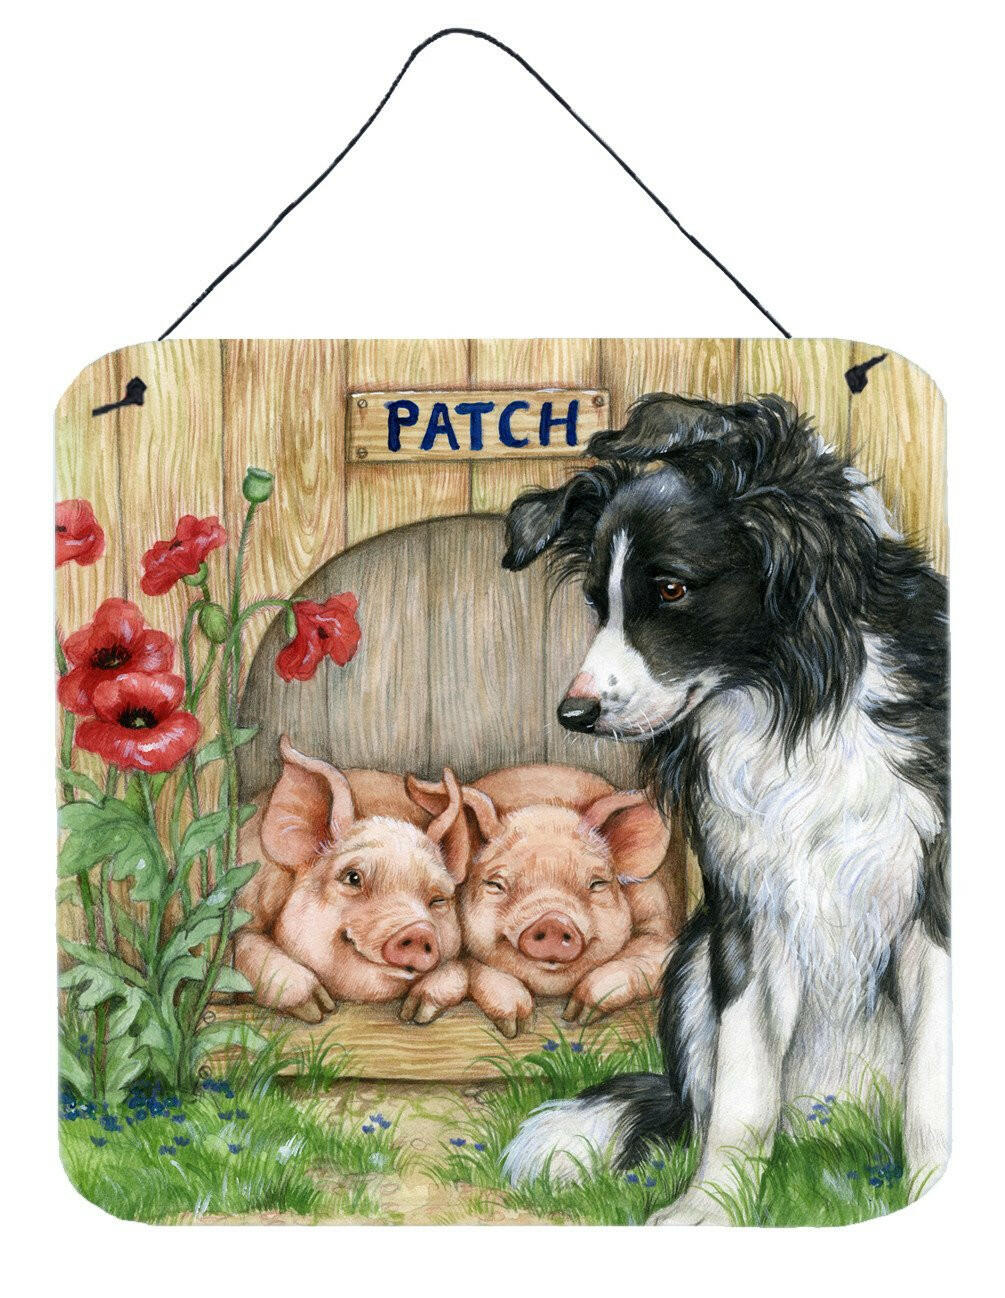 Patch the Border Collie and Piglet Friends Wall or Door Hanging Prints CDCO0362DS66 by Caroline's Treasures